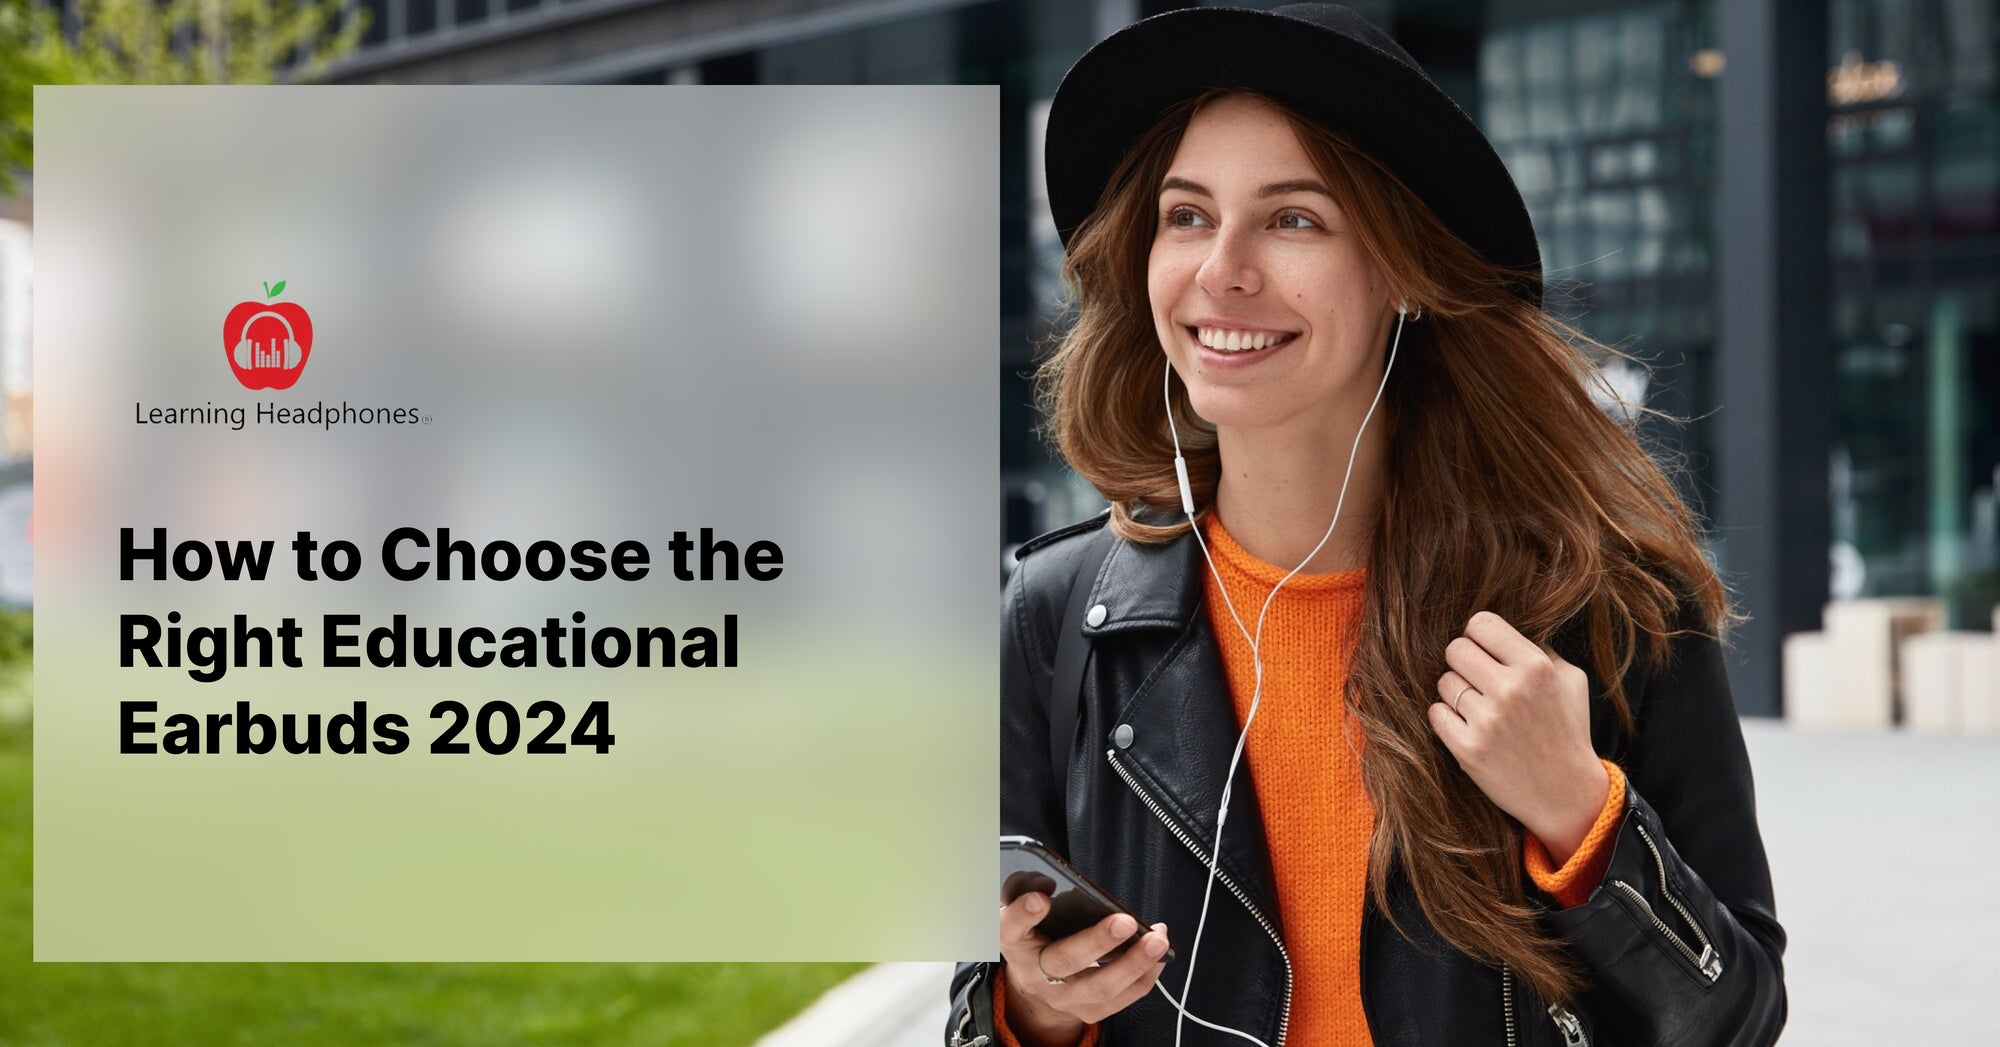 How to Choose the Right Educational Earbuds 2024